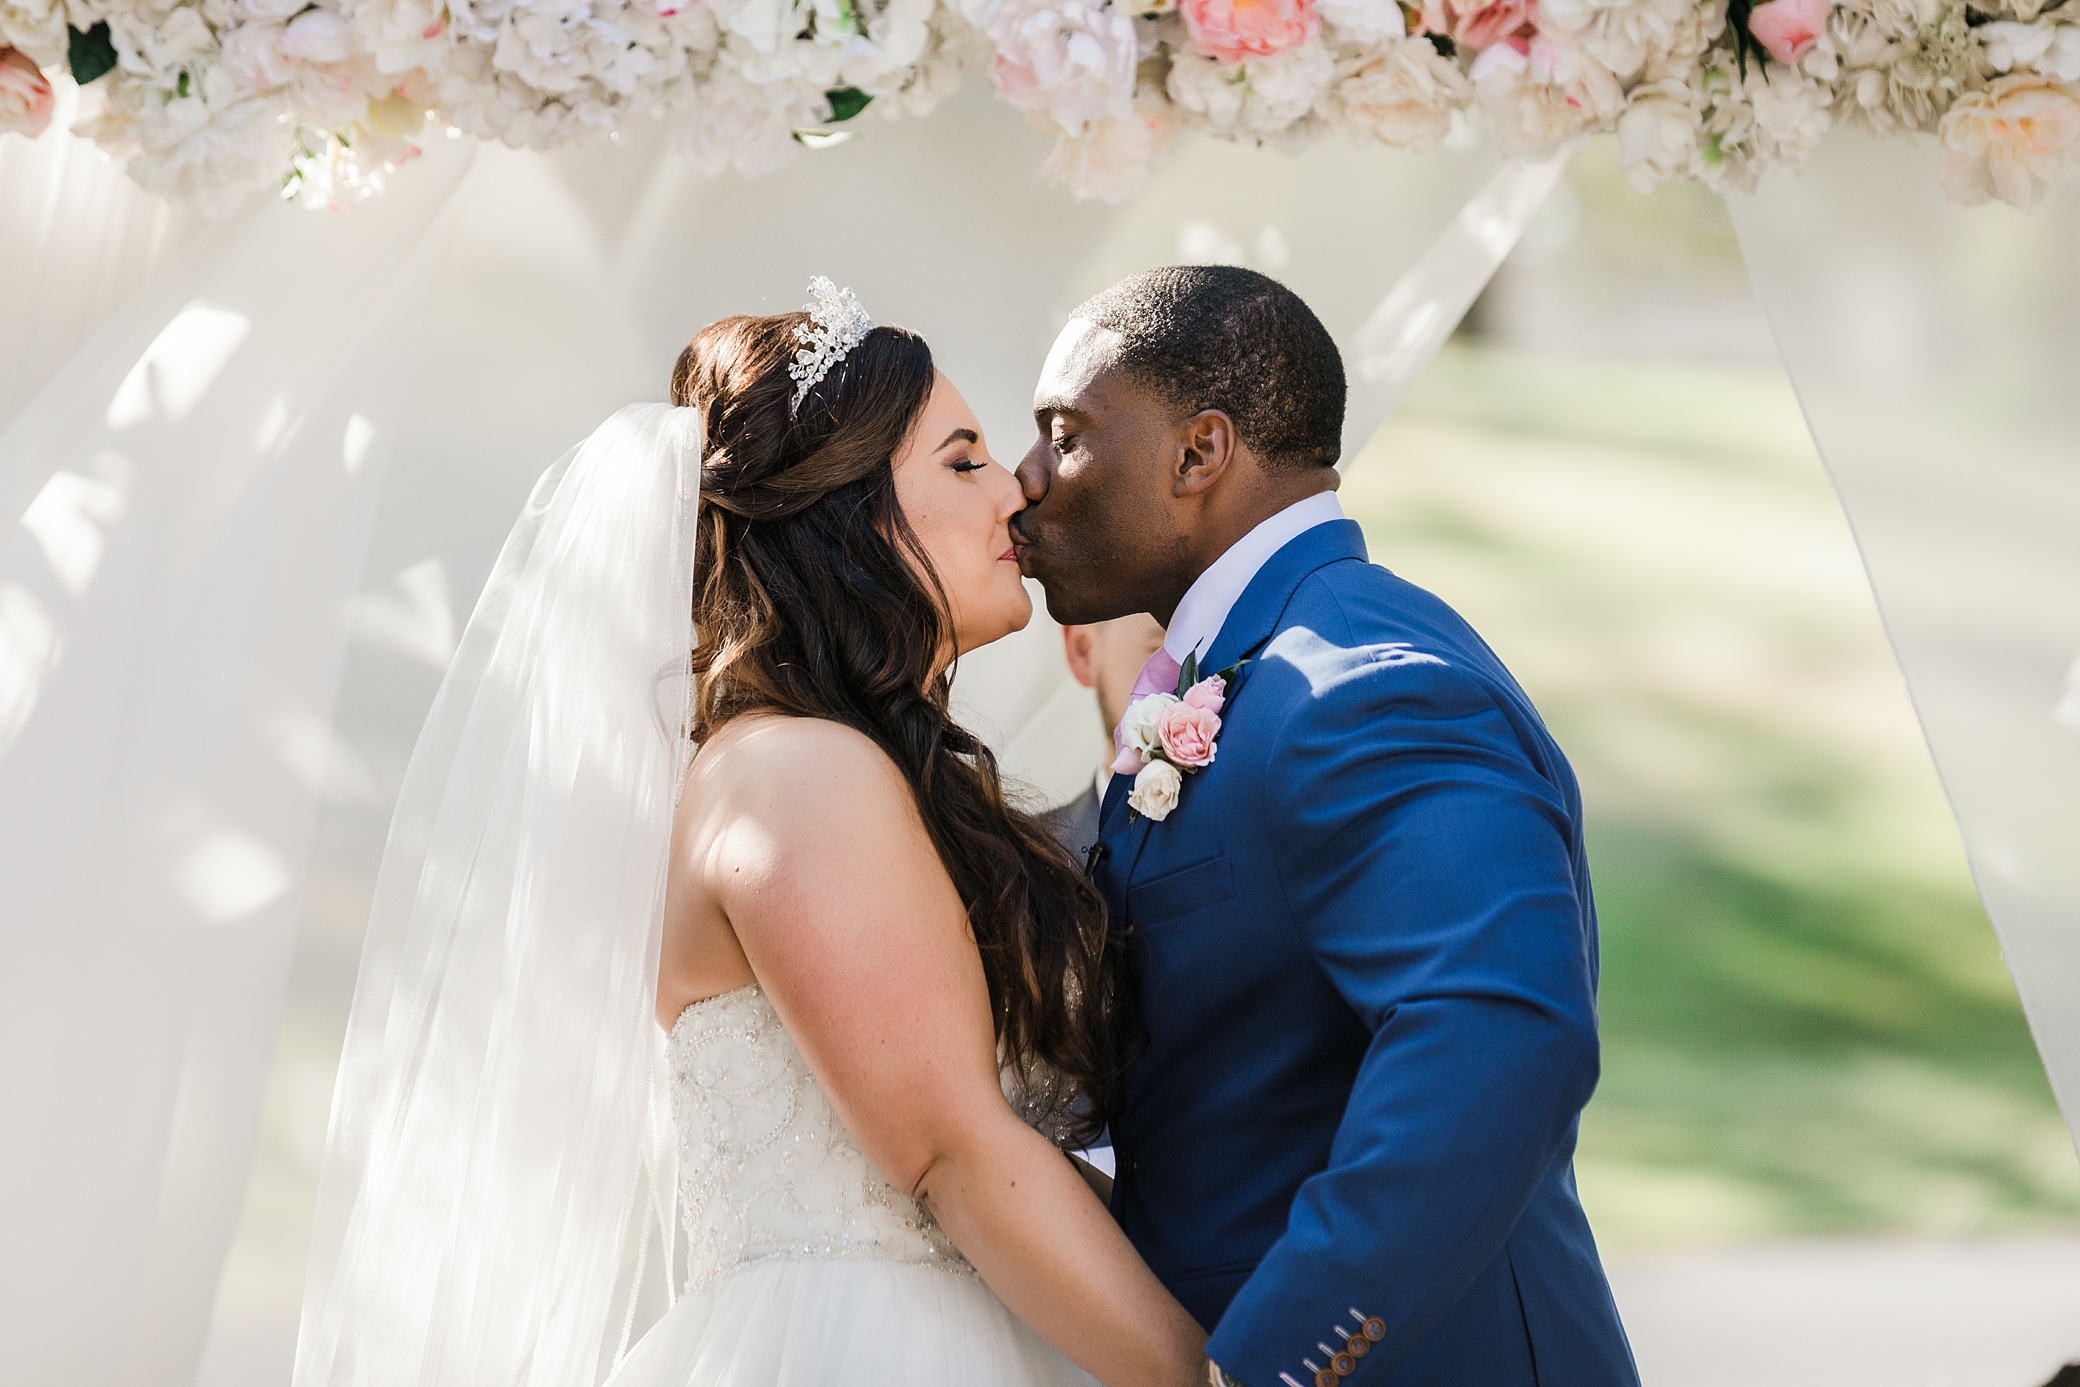 Bride and groom first kiss photographed by Olympia Wedding Photographer, Megan Montalvo Photography